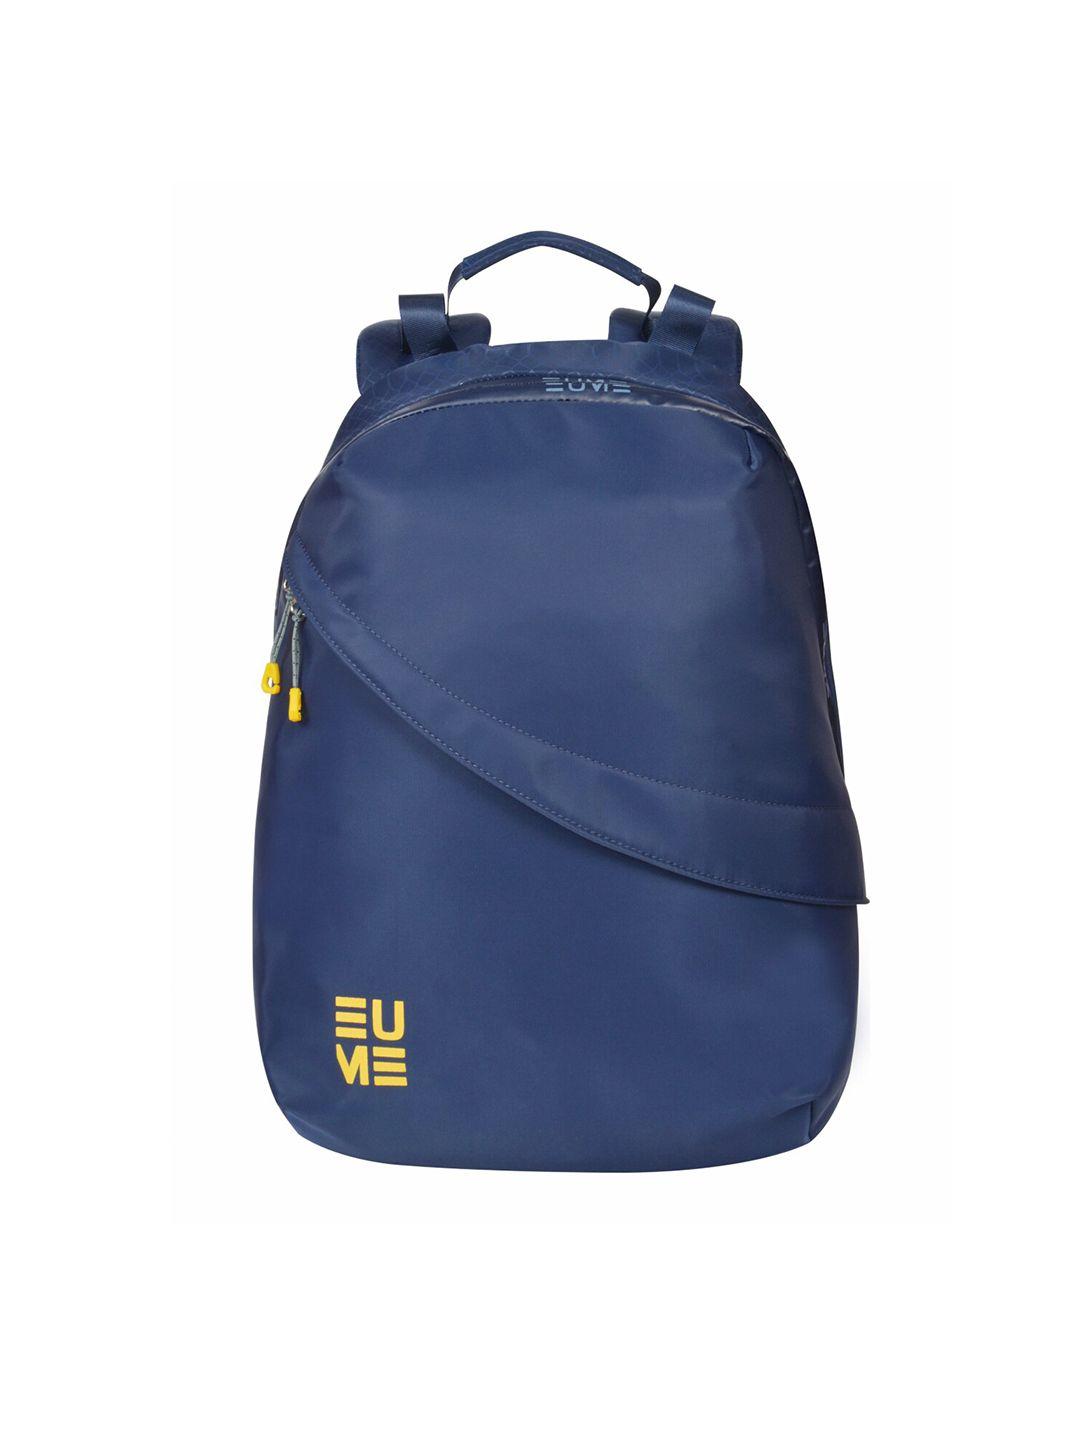 eume unisex navy blue & yellow crystal backpack